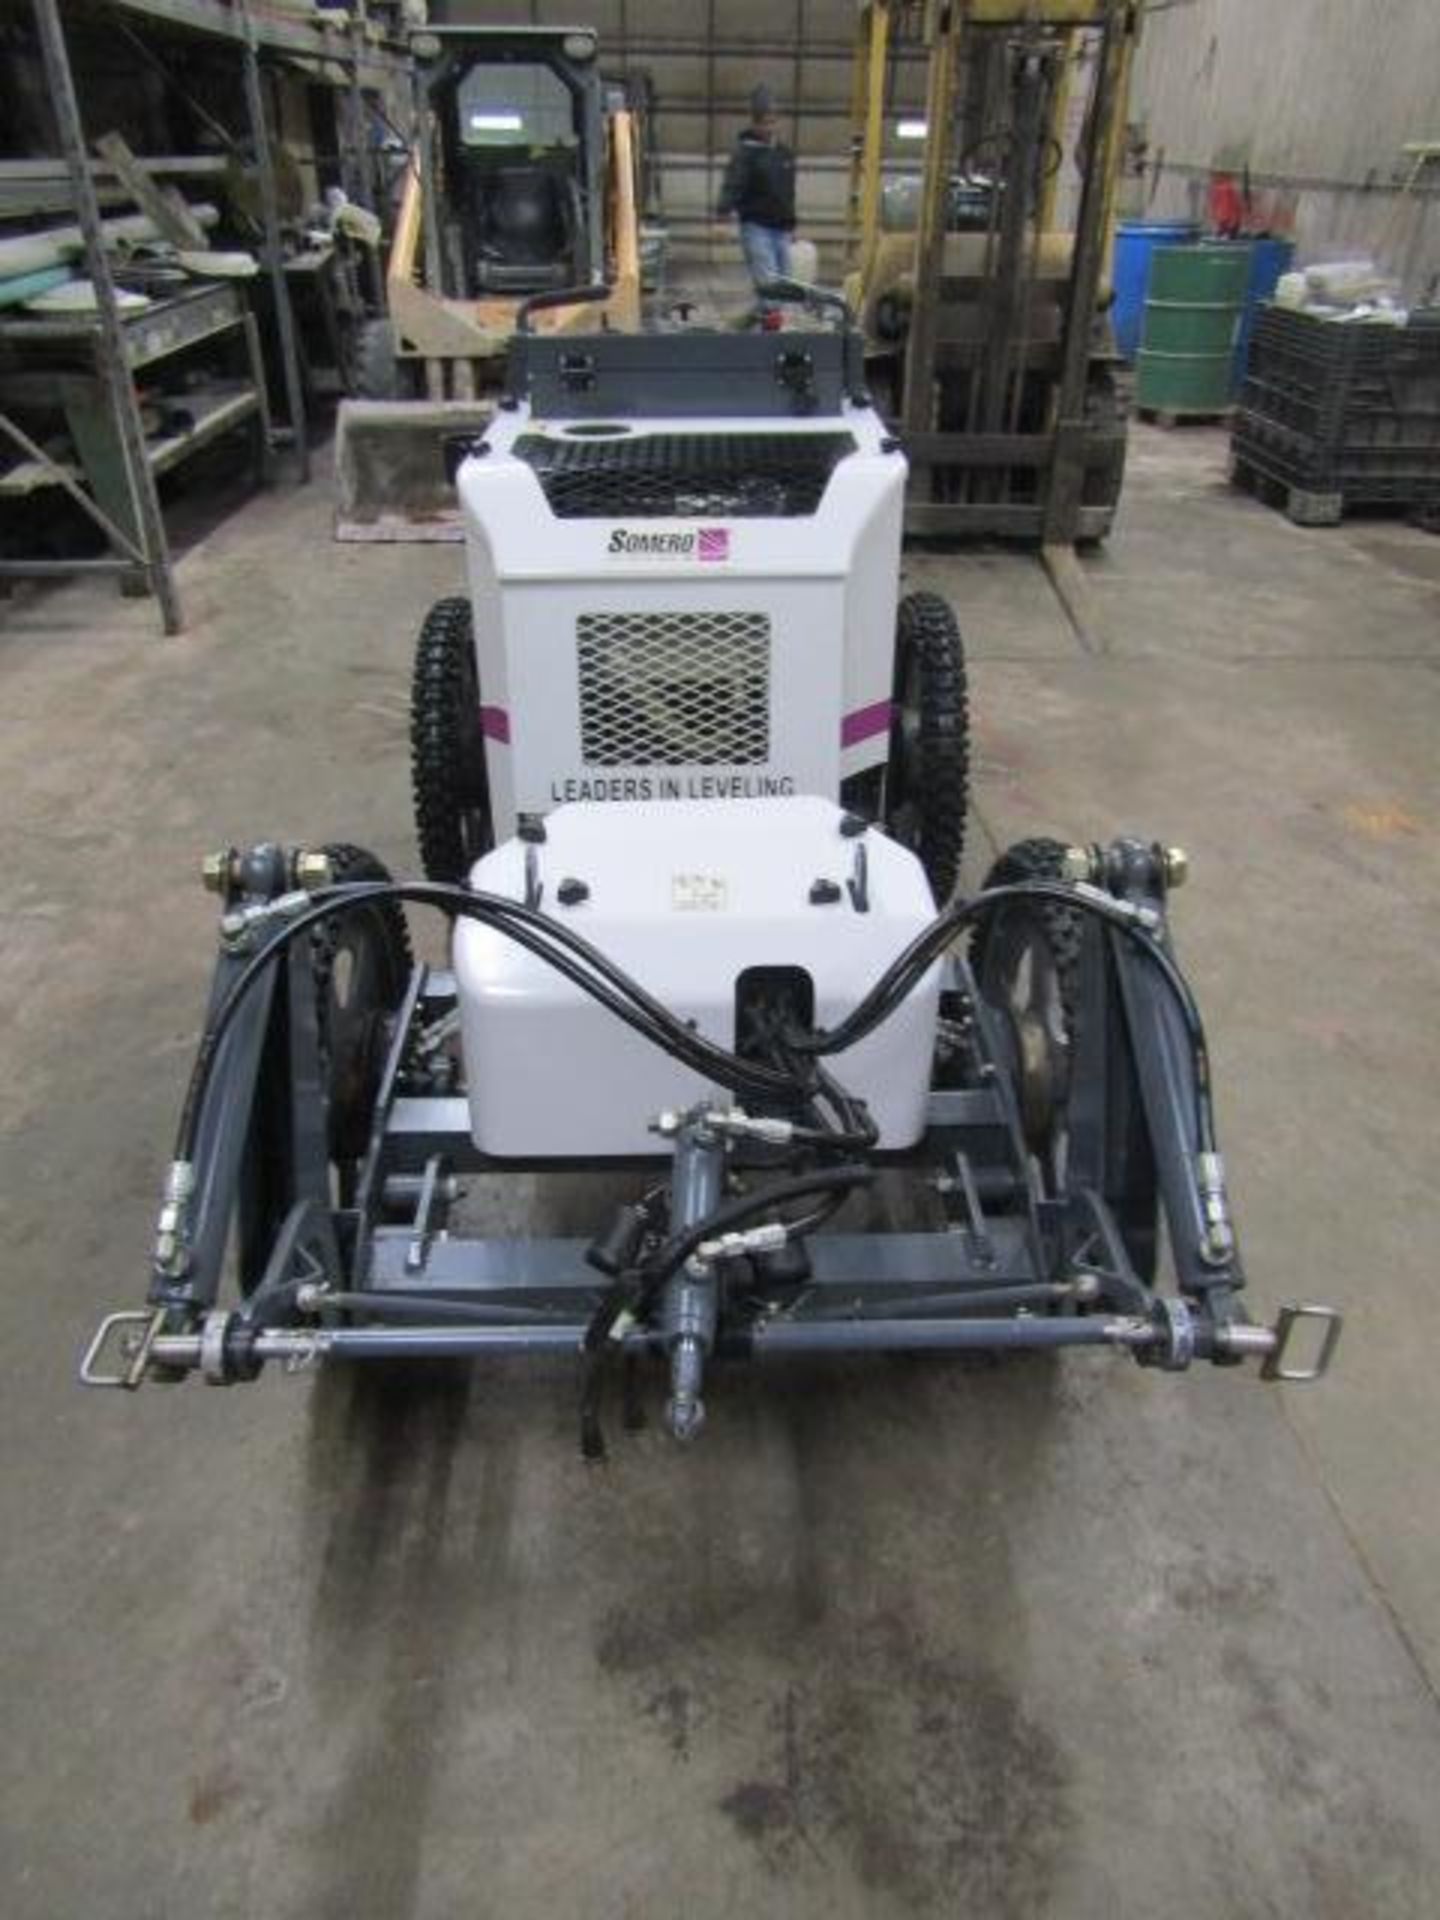 2017 Somero S-485 Laser Screed, Serial #25156-0517, ONE OWNER, 108 hrs, w/ GL622 Laser - Image 3 of 32